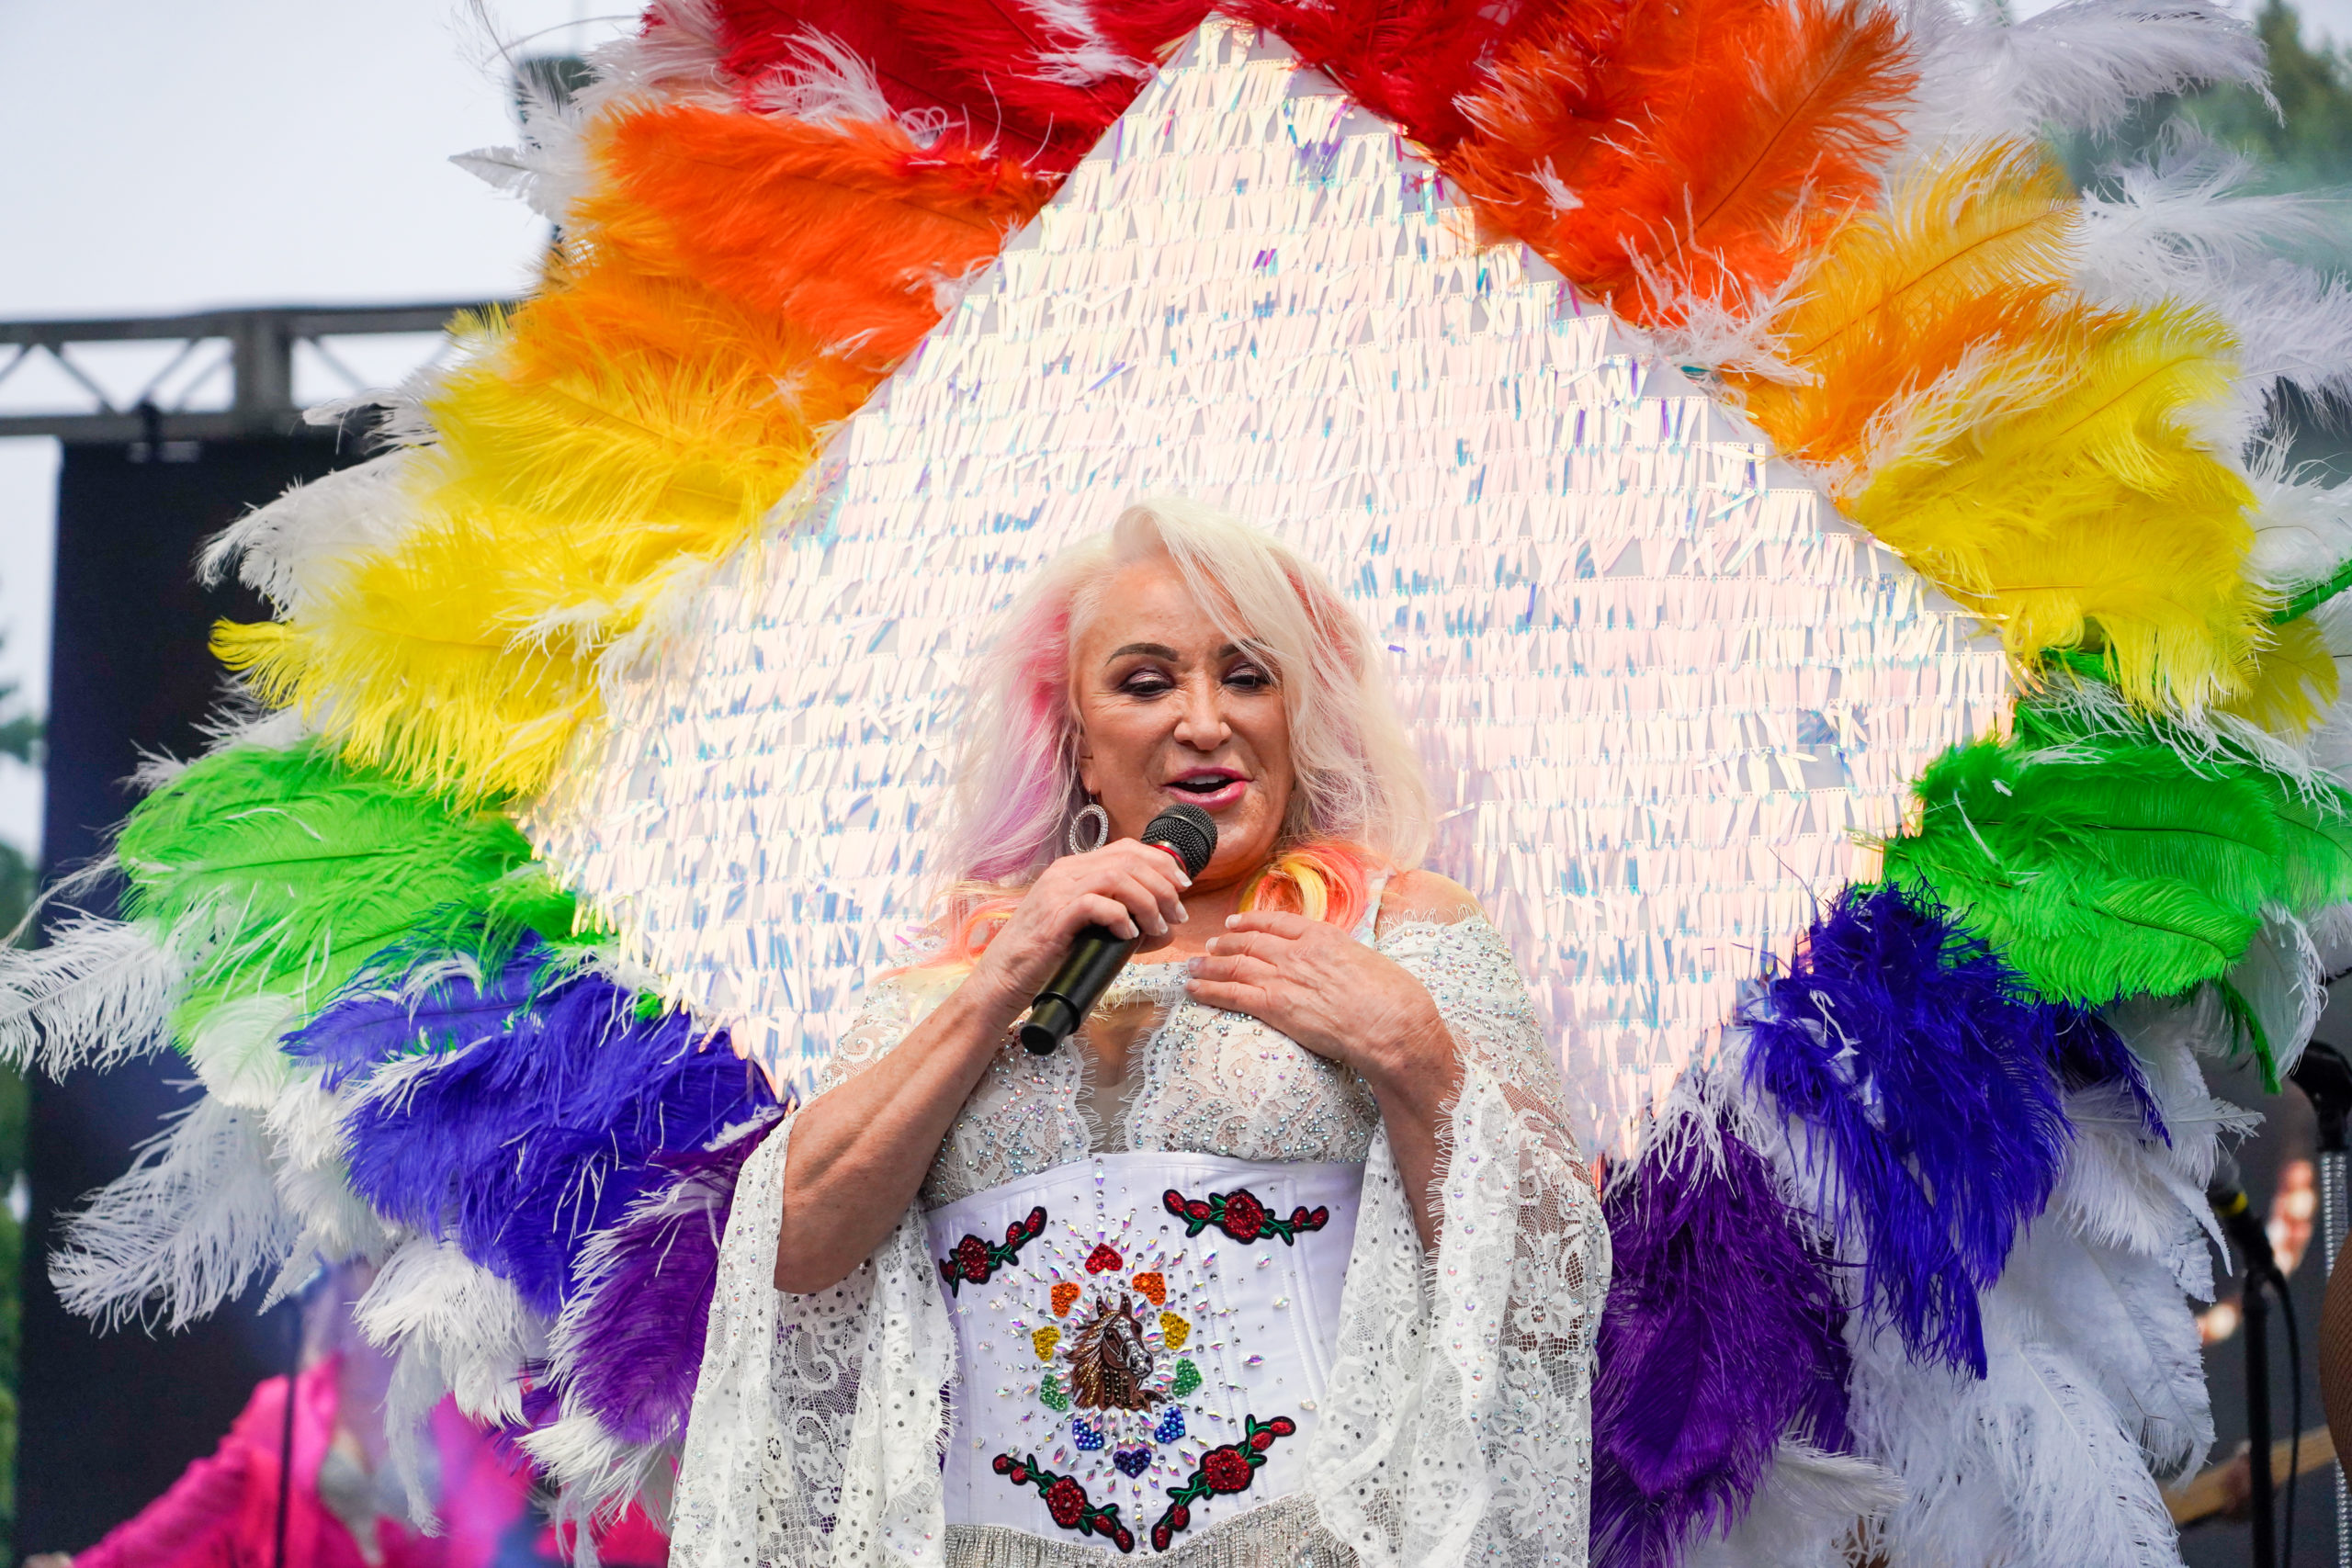 Tanya Tucker performs on the Equality Stage during day 2 of Nashville Pride 2022 on June 26, 2022 in Nashville, Tennessee. (Photo by Mickey Bernal/Getty Images)